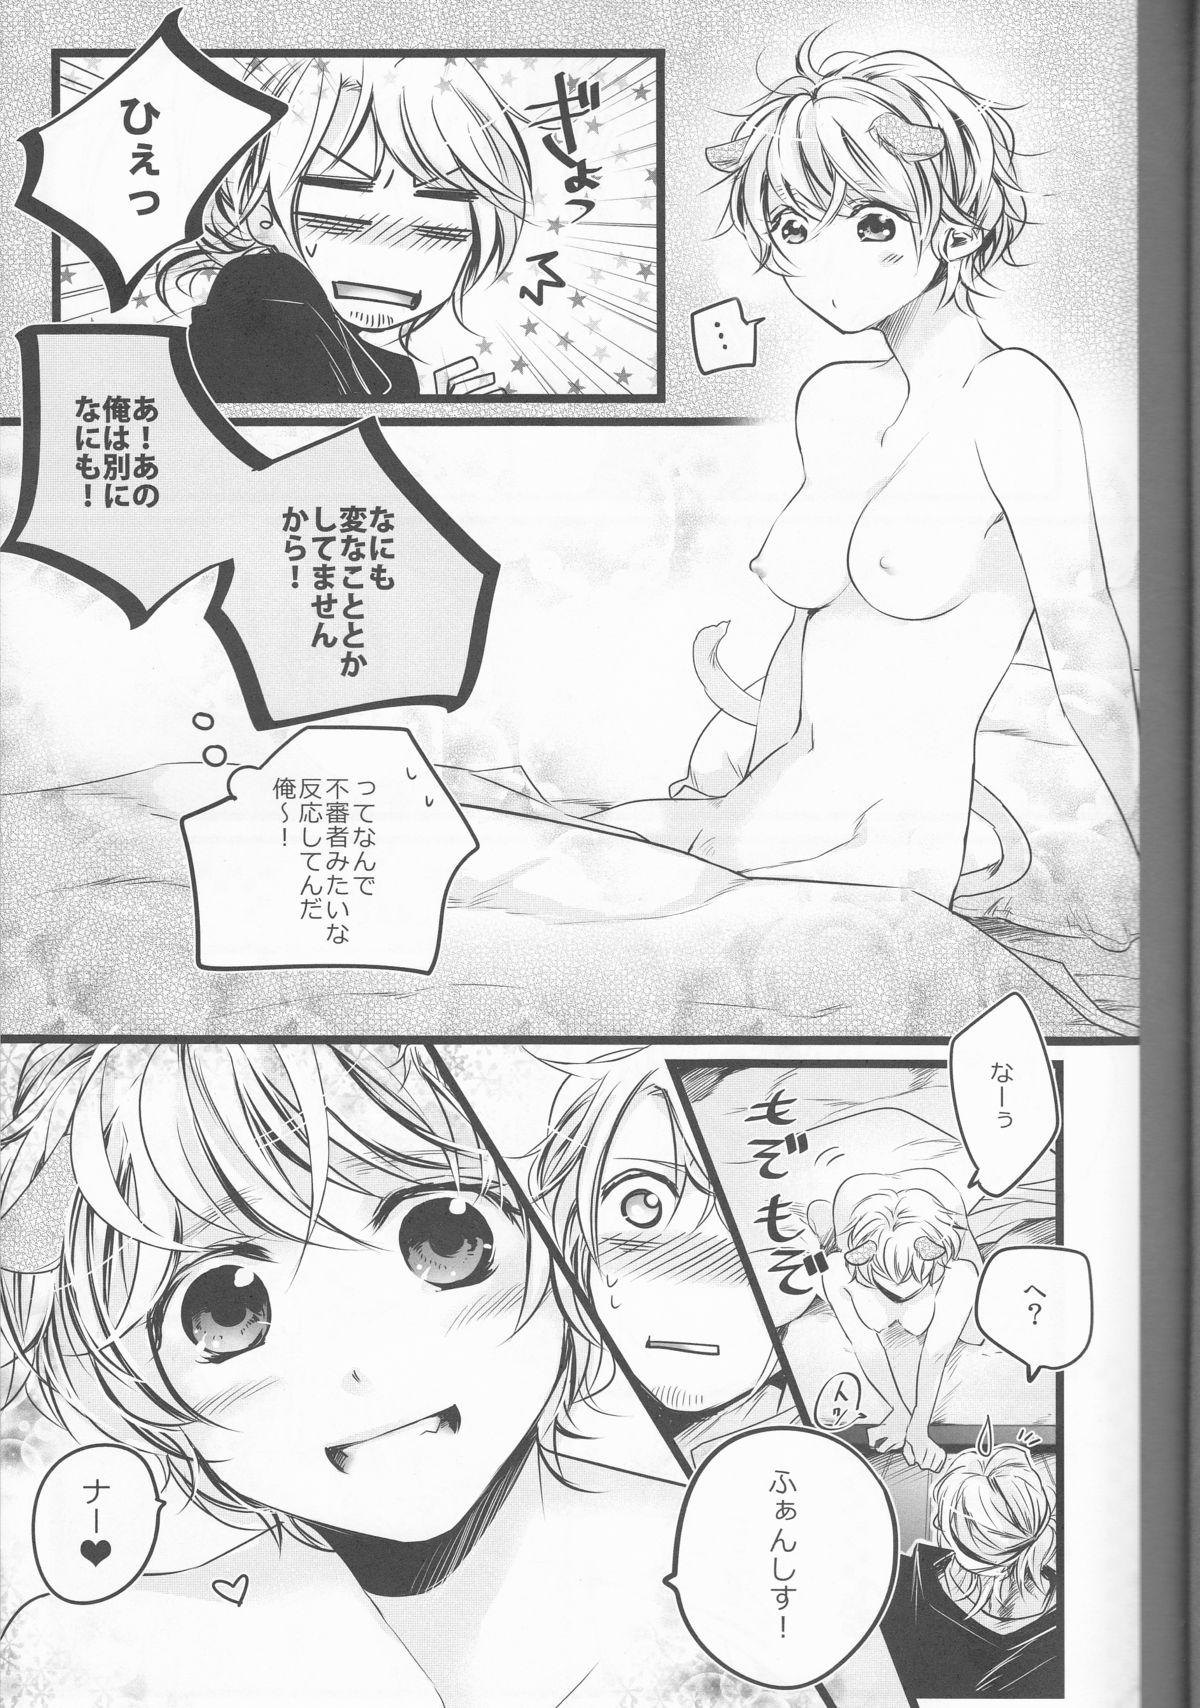 Boss ]Bell the cat! - Axis powers hetalia Gayporn - Page 8